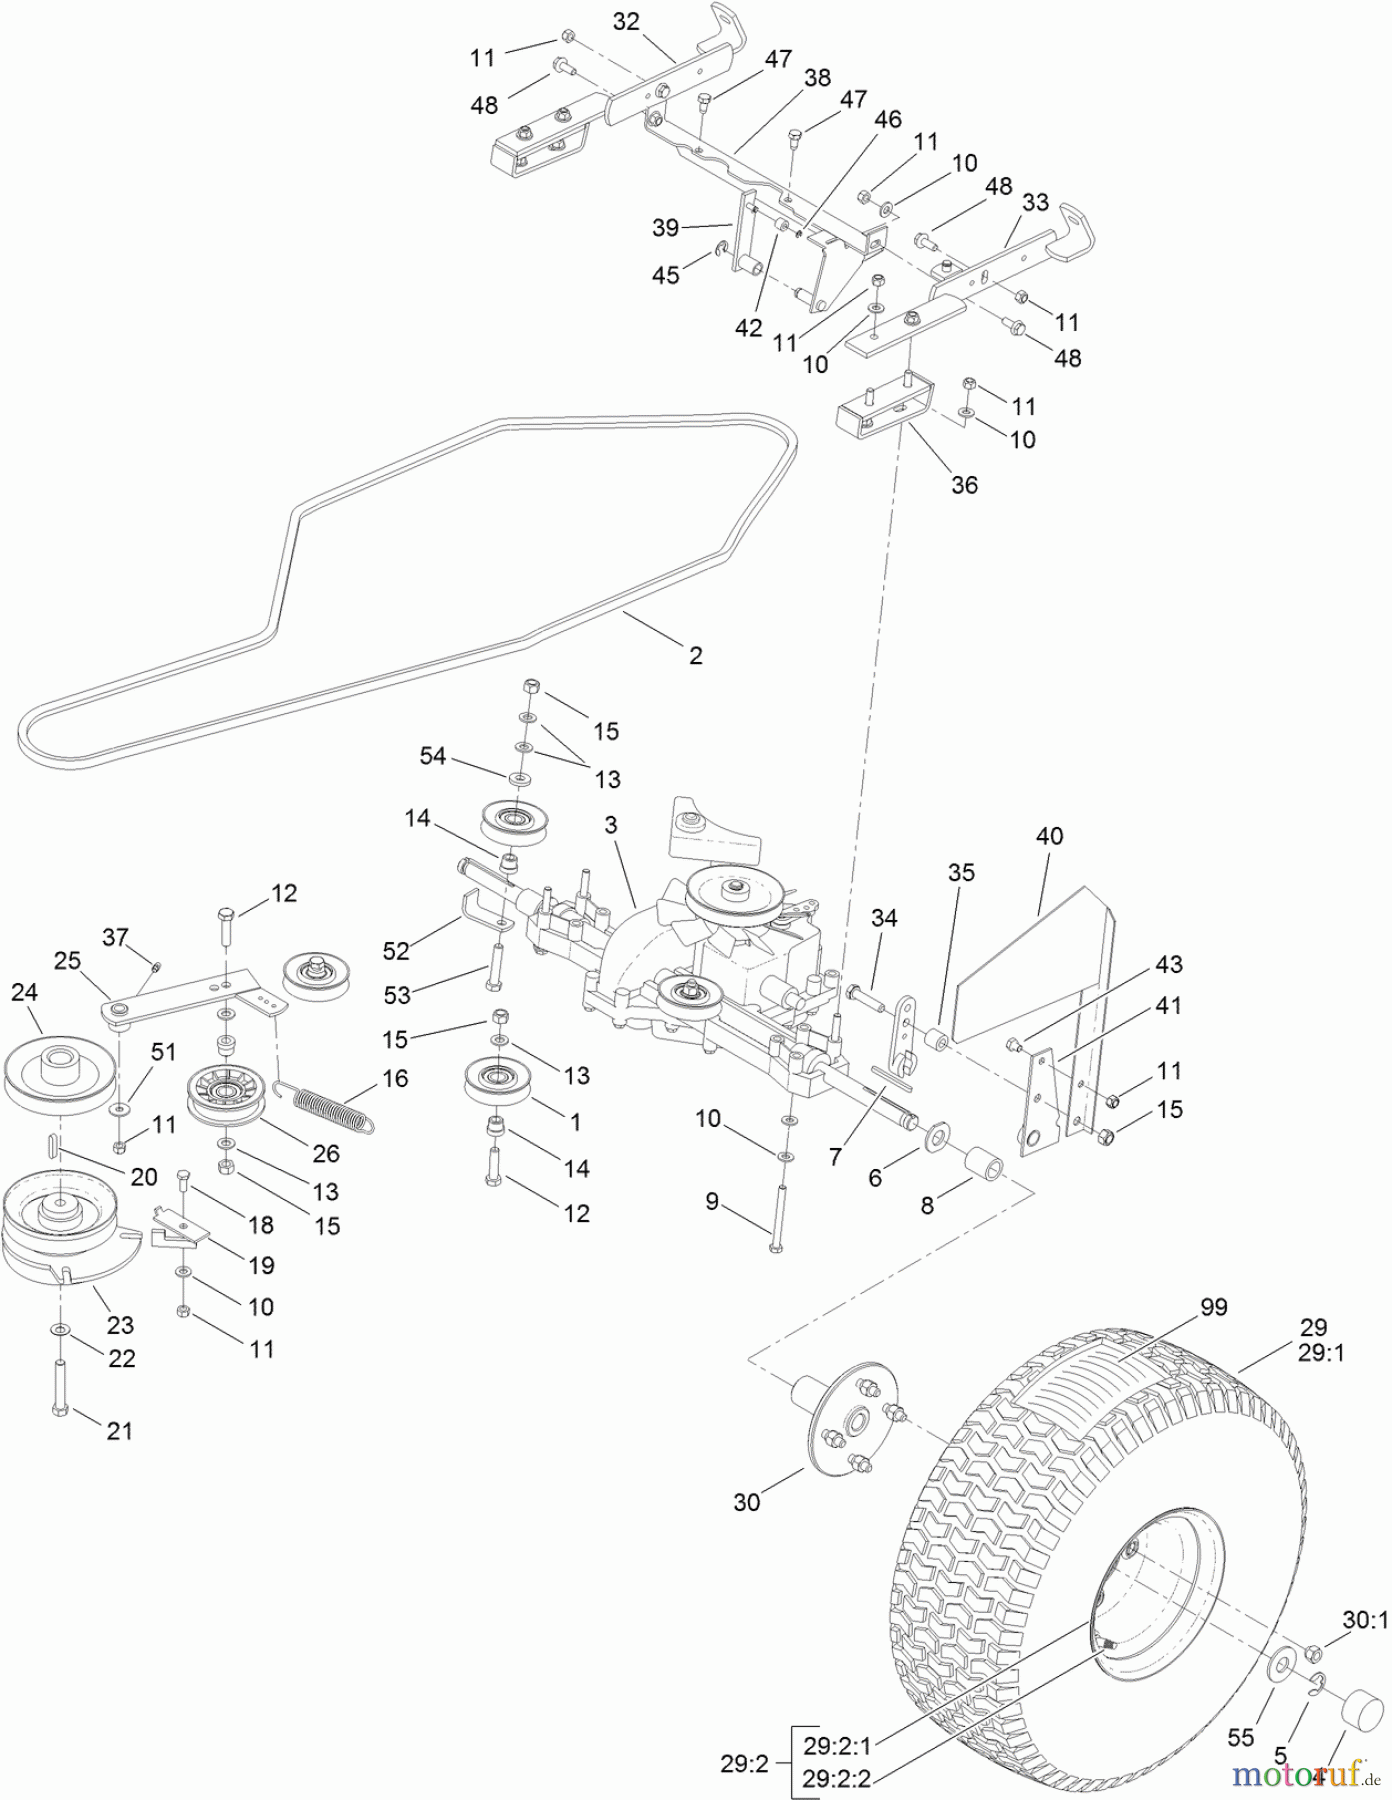  Toro Neu Mowers, Lawn & Garden Tractor Seite 1 74593 (DH 220) - Toro DH 220 Lawn Tractor, 2011 (311000401-311999999) REAR WHEEL AND TRANSAXLE ASSEMBLY